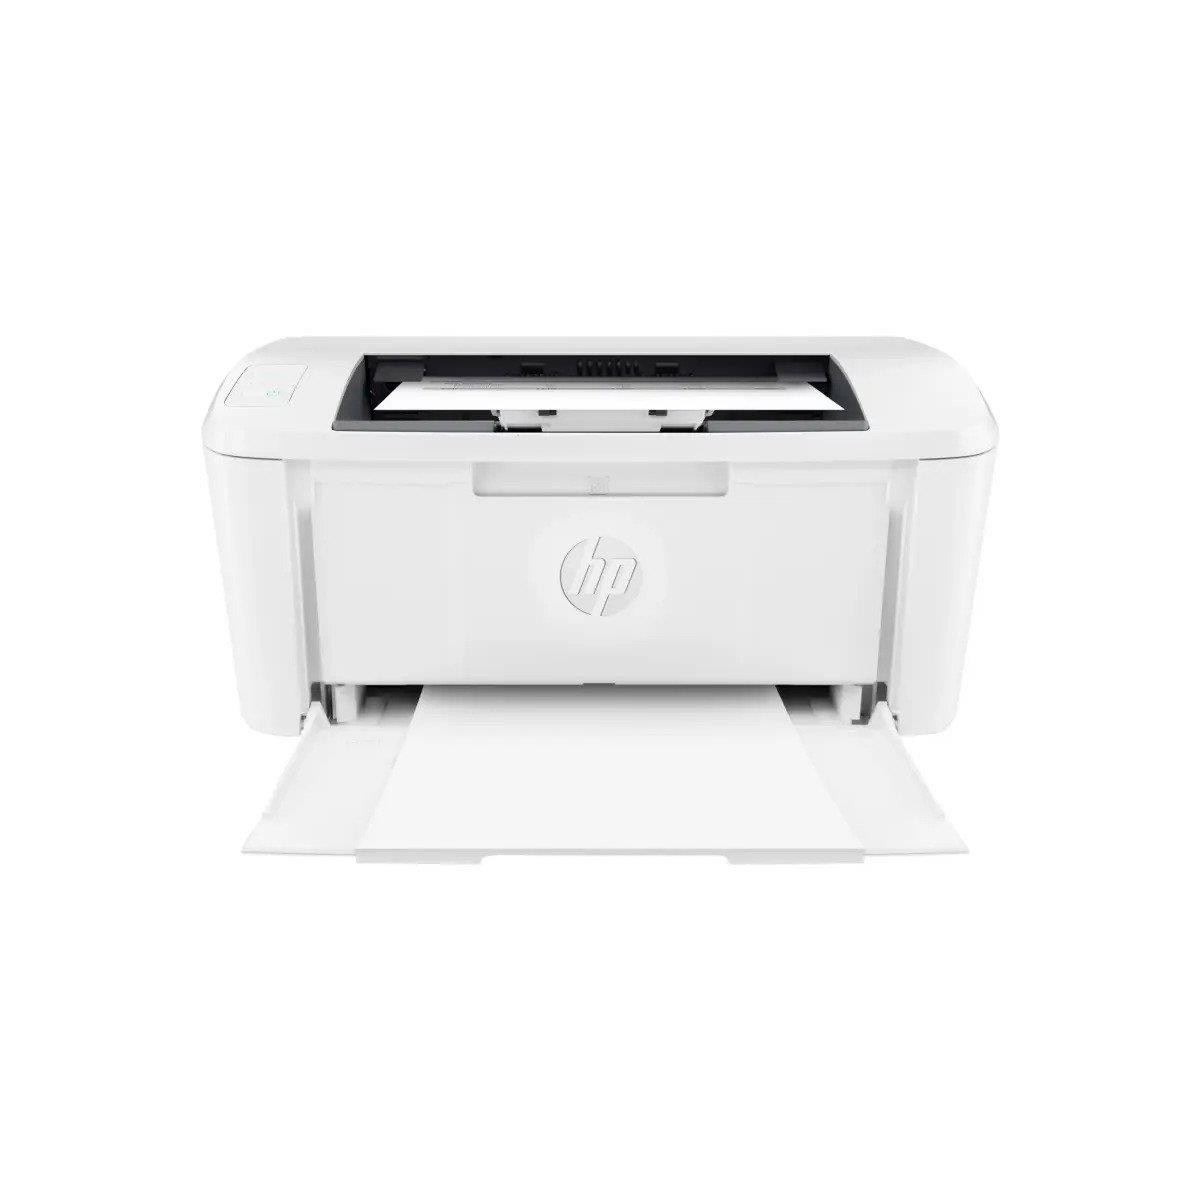 HP LaserJet M110we Printer - Black and white - Printer for Small office - Print - Wireless + Instant Ink eligible - Laser - 600 